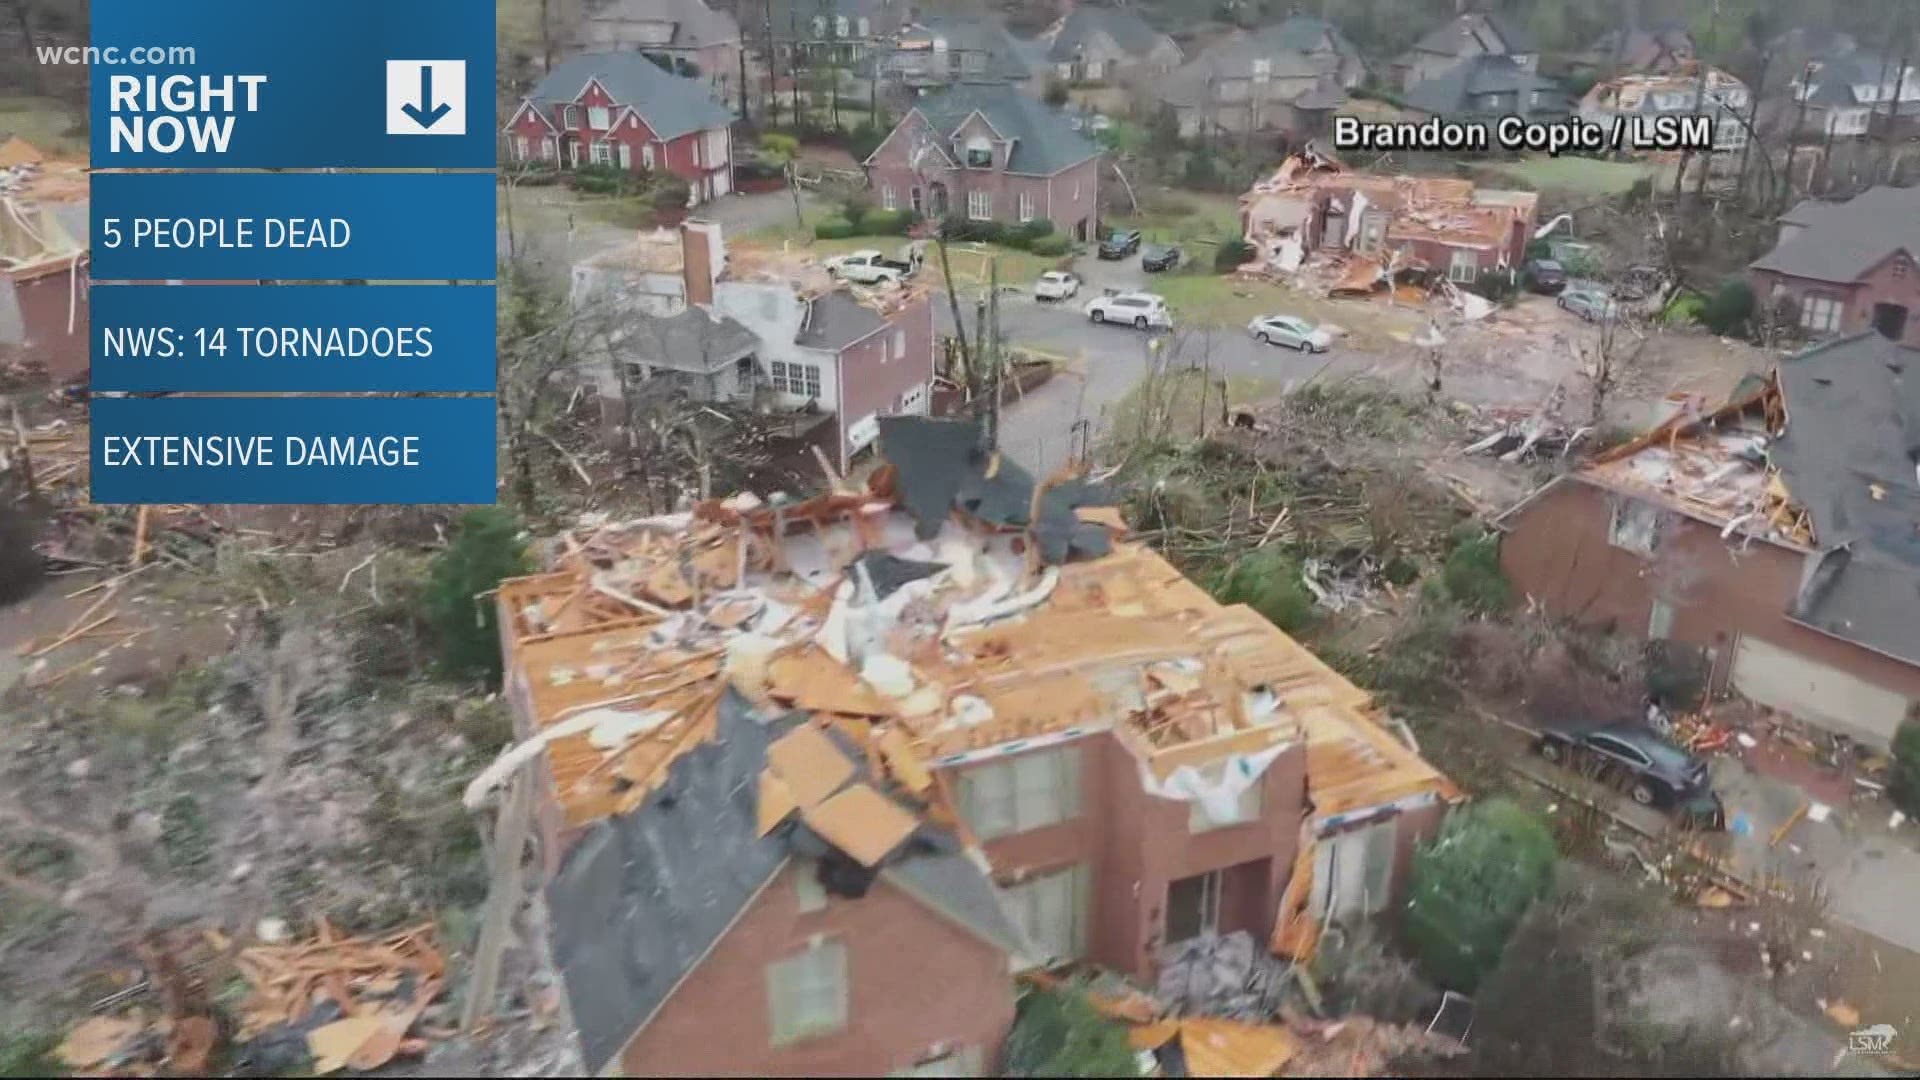 At least 5 people are dead after a possible tornado touched down in Alabama. According to the National Weather Service, 14 tornadoes happened in the outbreak.